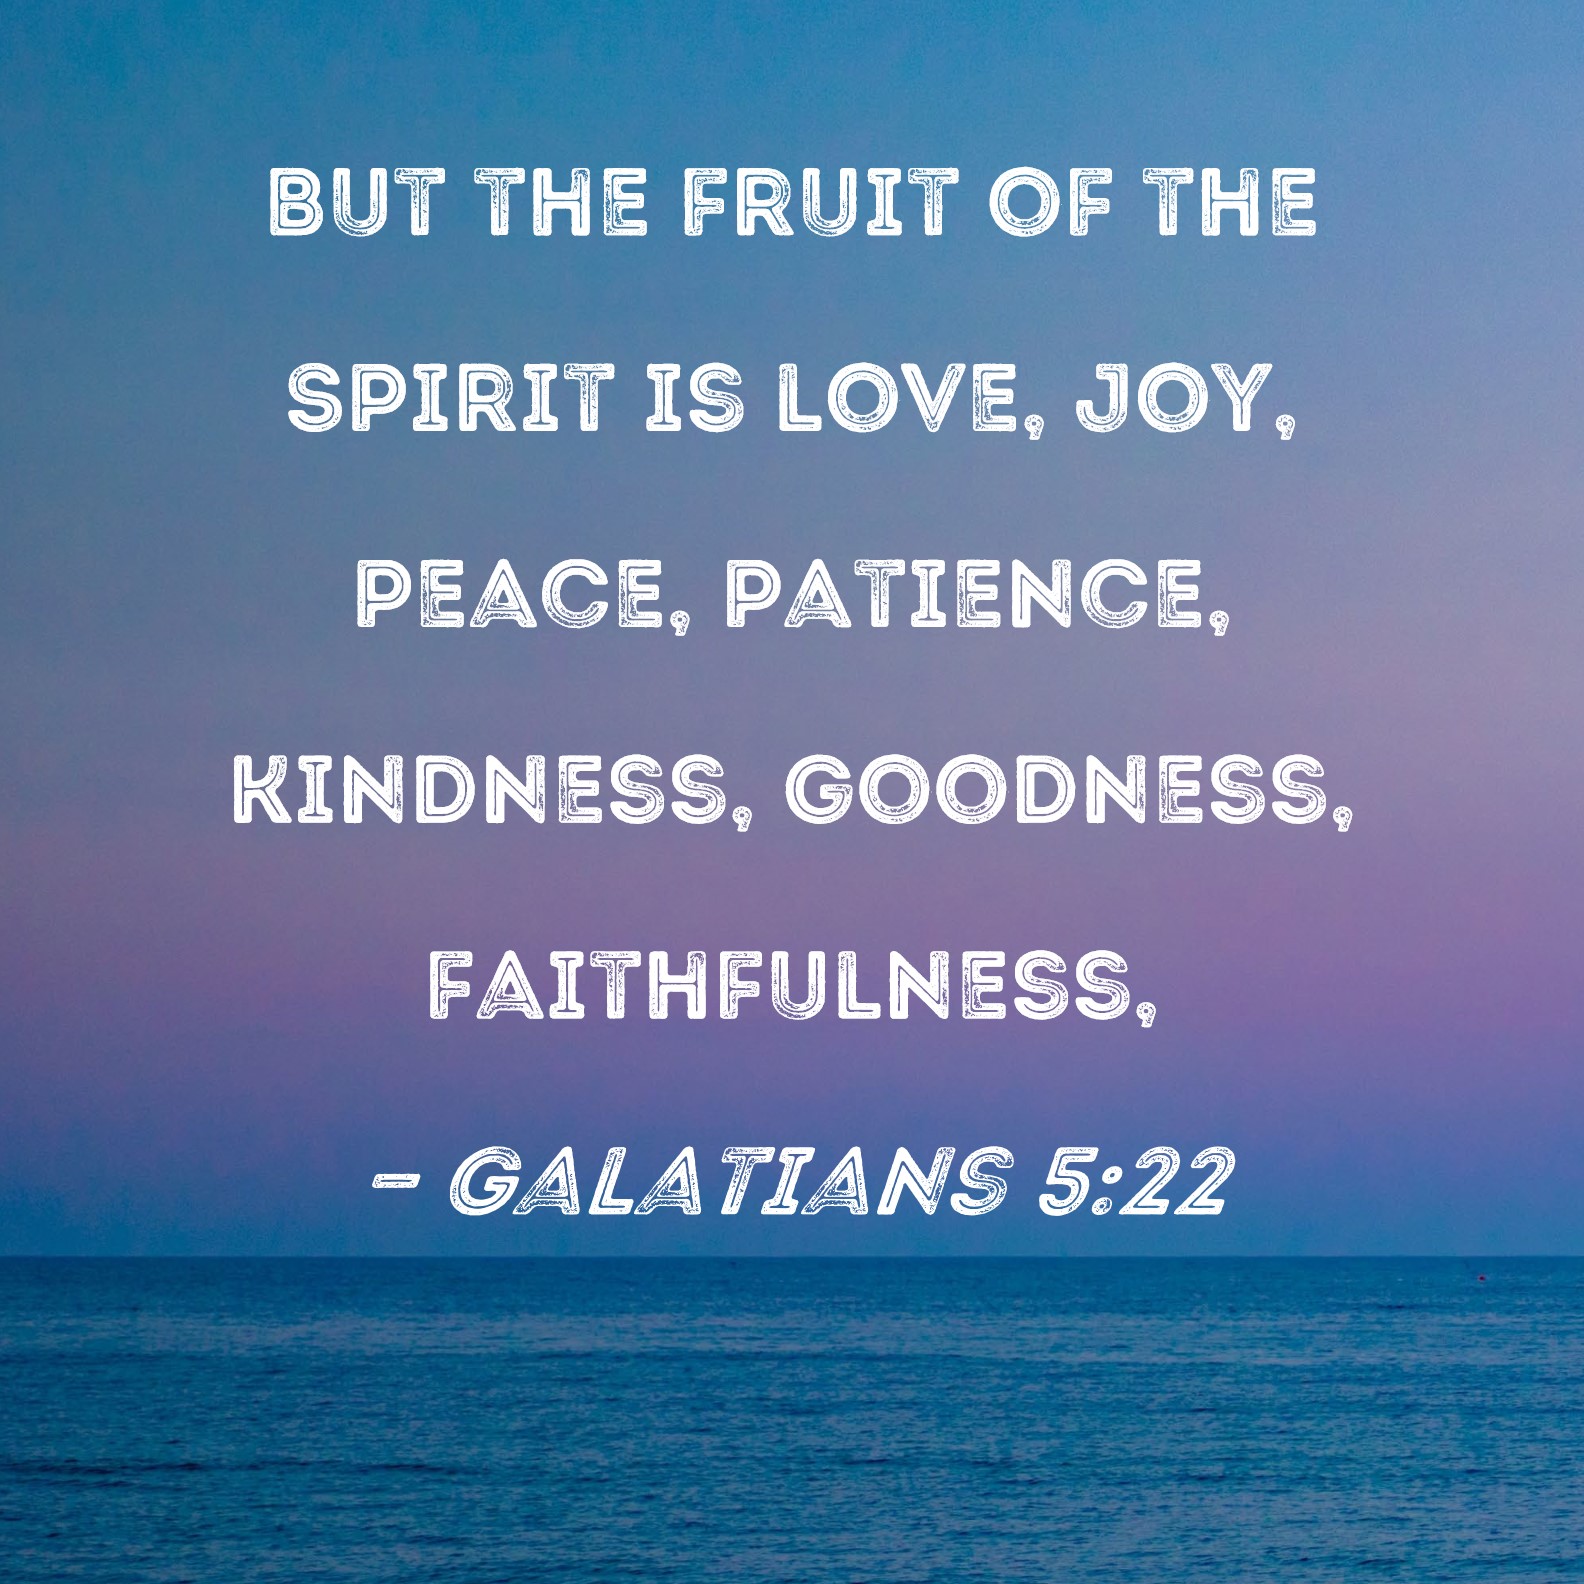 Fruits of the Spirit Part 1